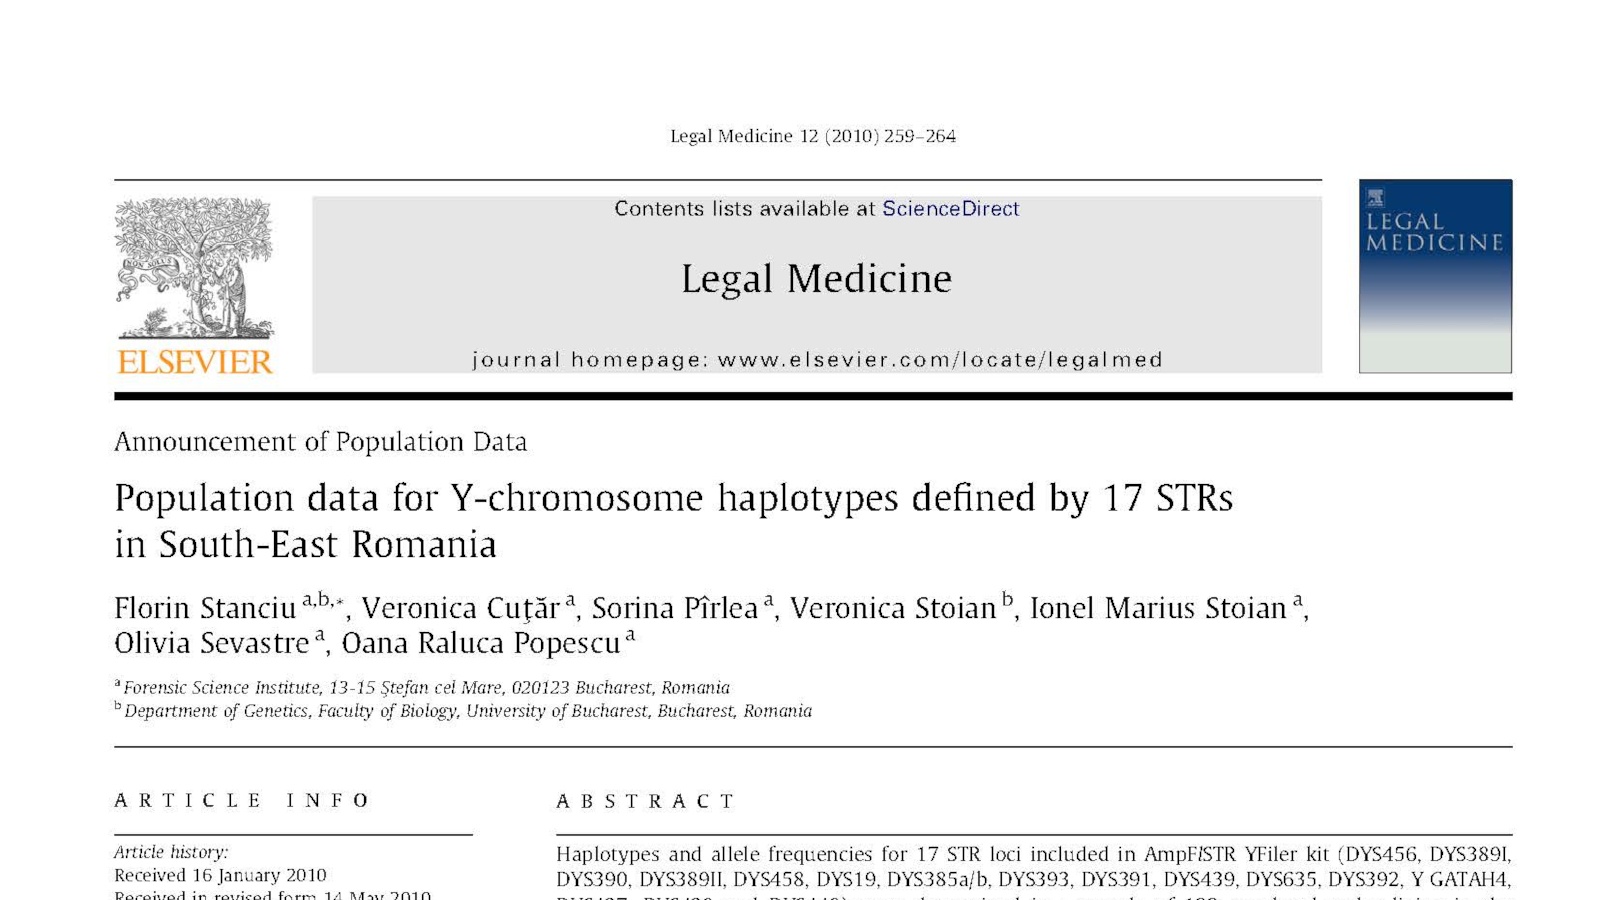 Population data for Y-chromosome haplotypes defined by 17 STRs in South-East Romania